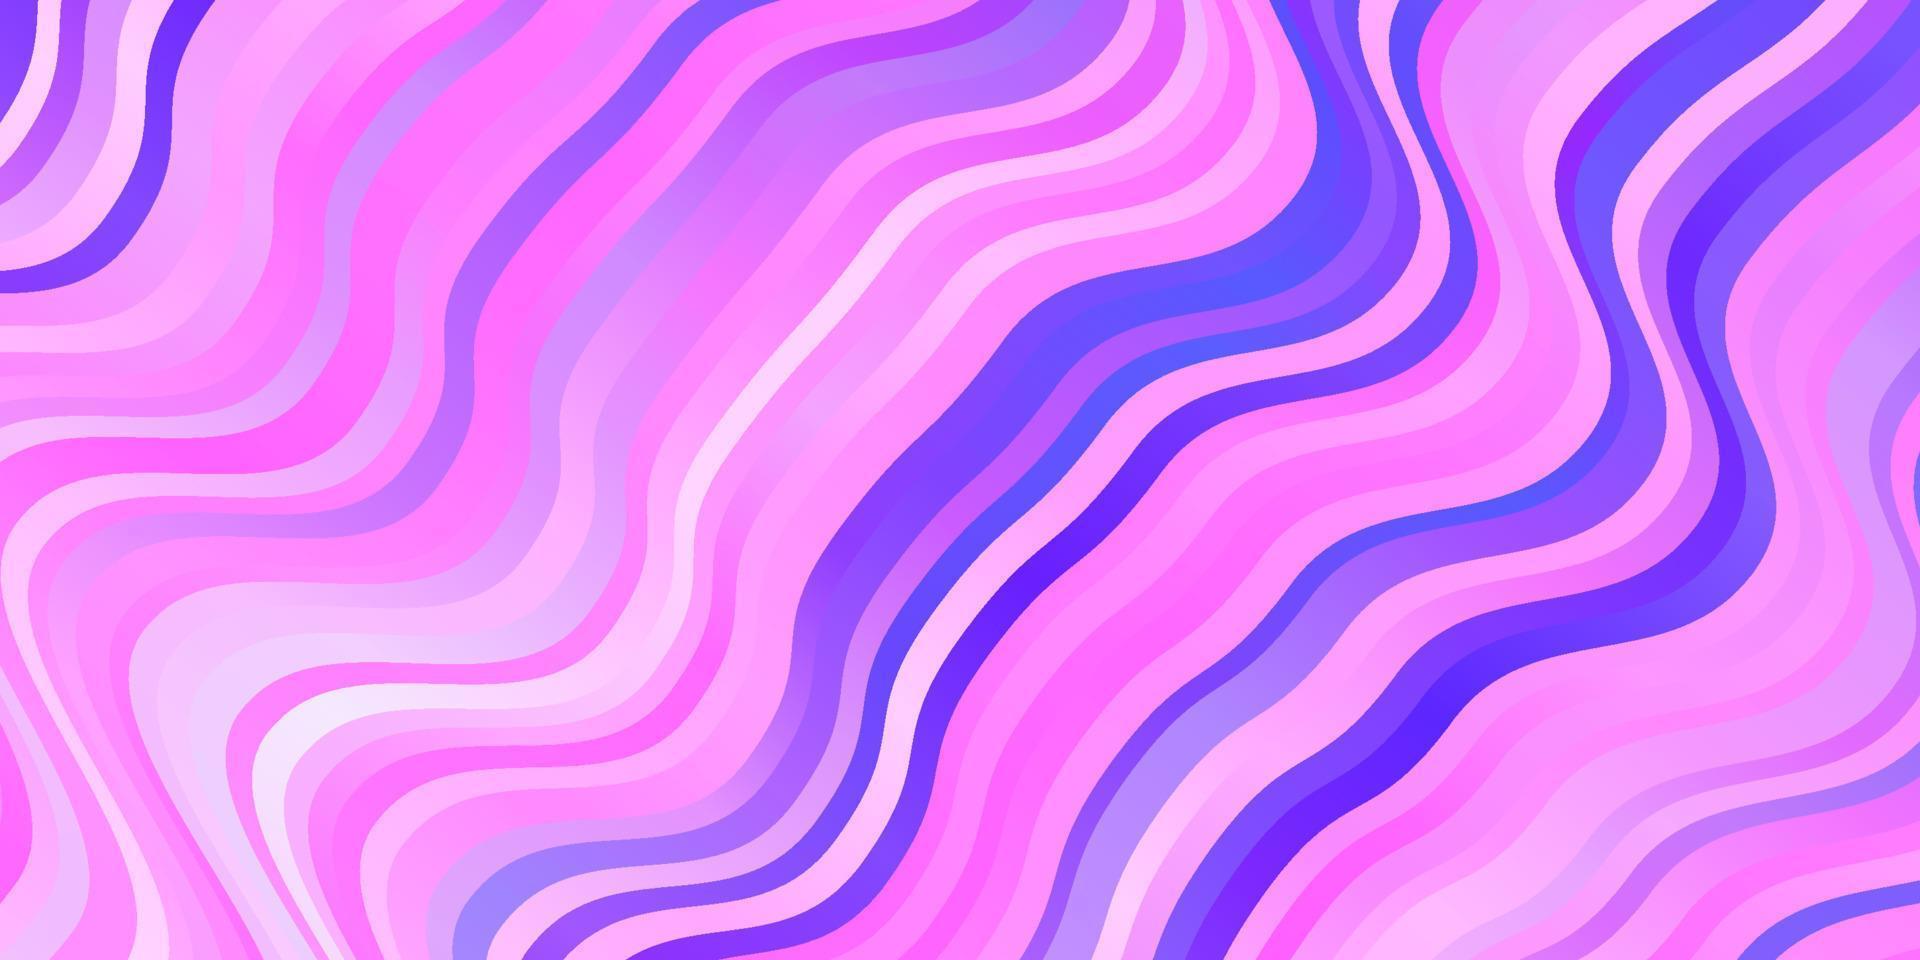 Light Purple vector pattern with wry lines.